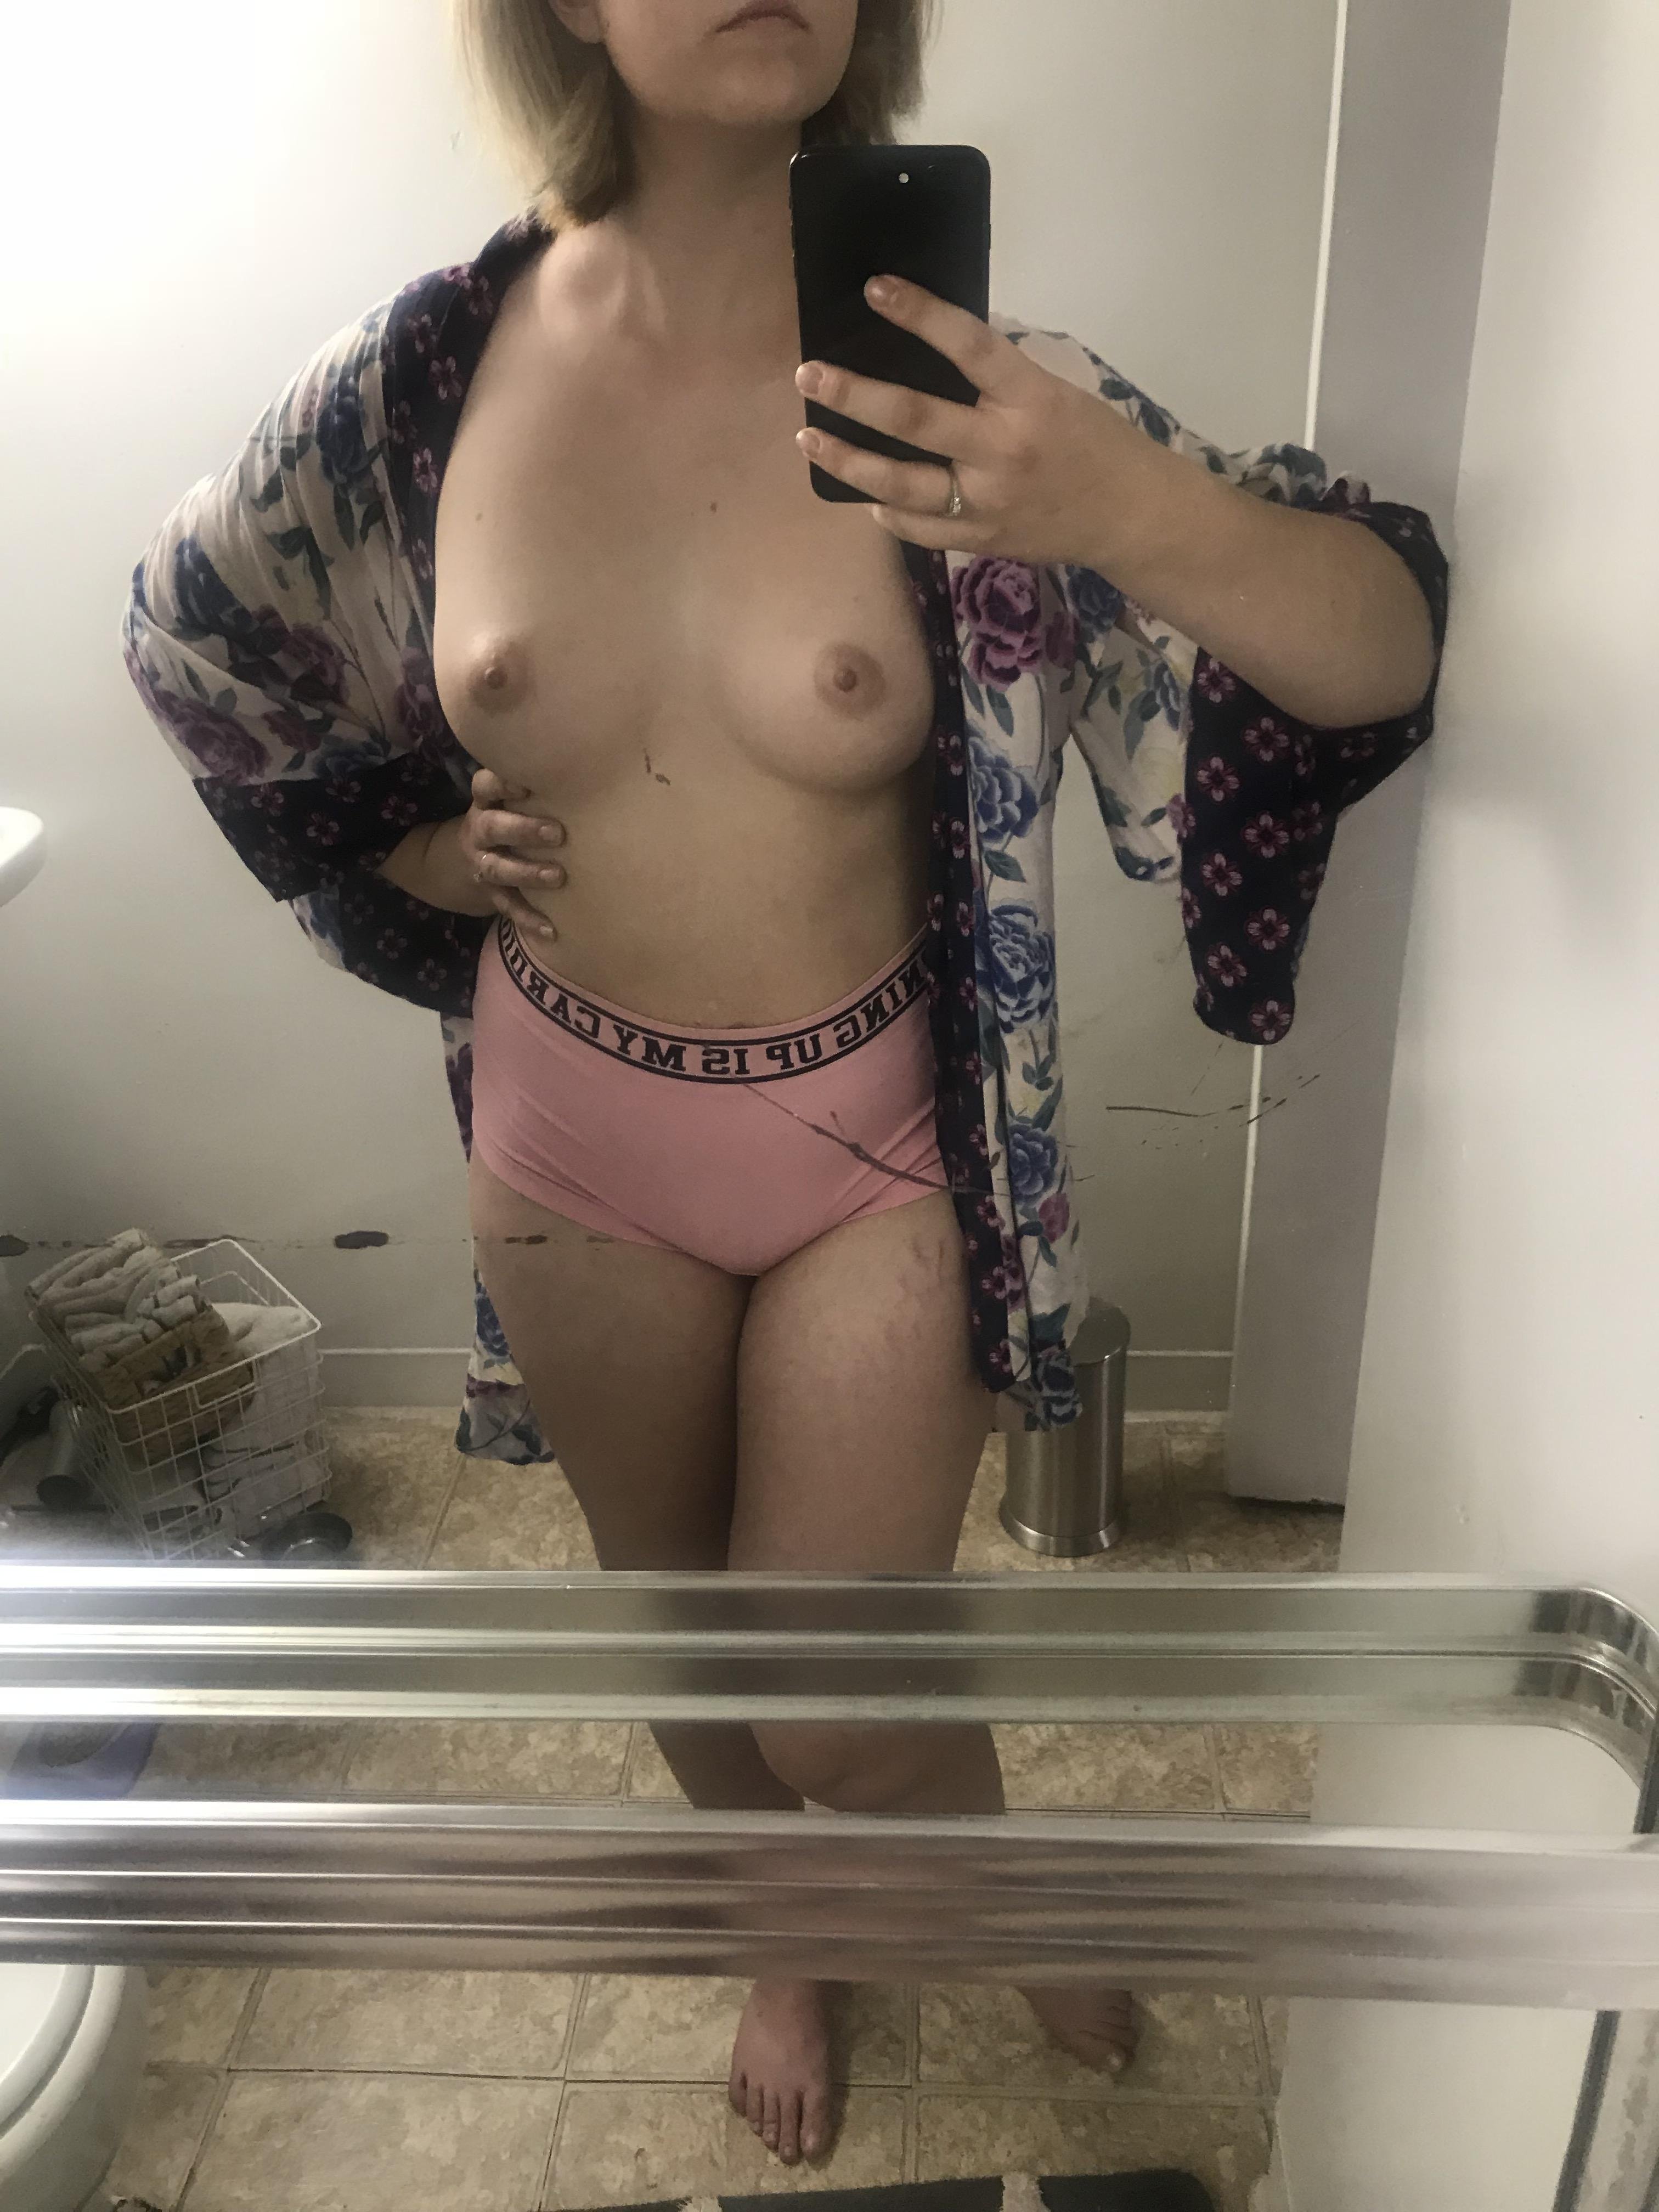 It’s been a [f]air amount of time since I’ve seen a lady on here! 